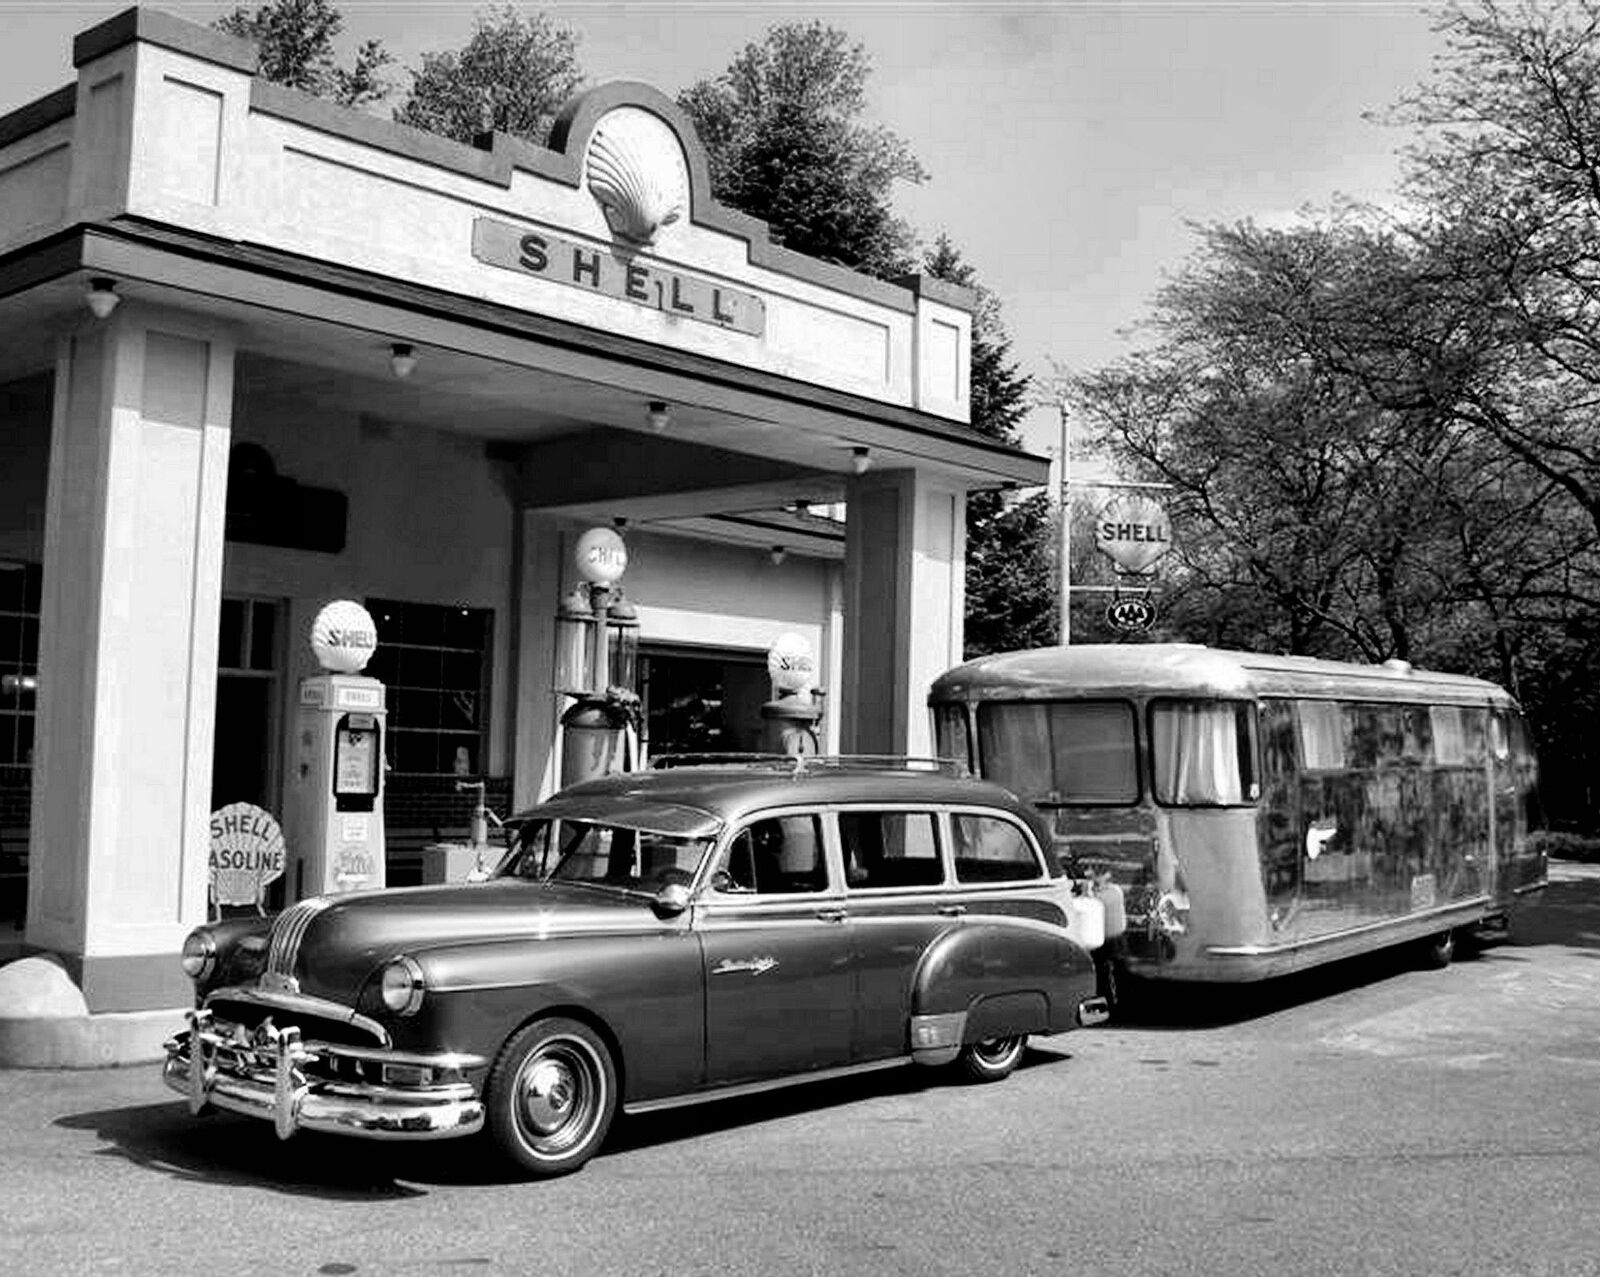 1950s Vintage CAR & TRAILER at SHELL GAS STATION Photo  (184-W)